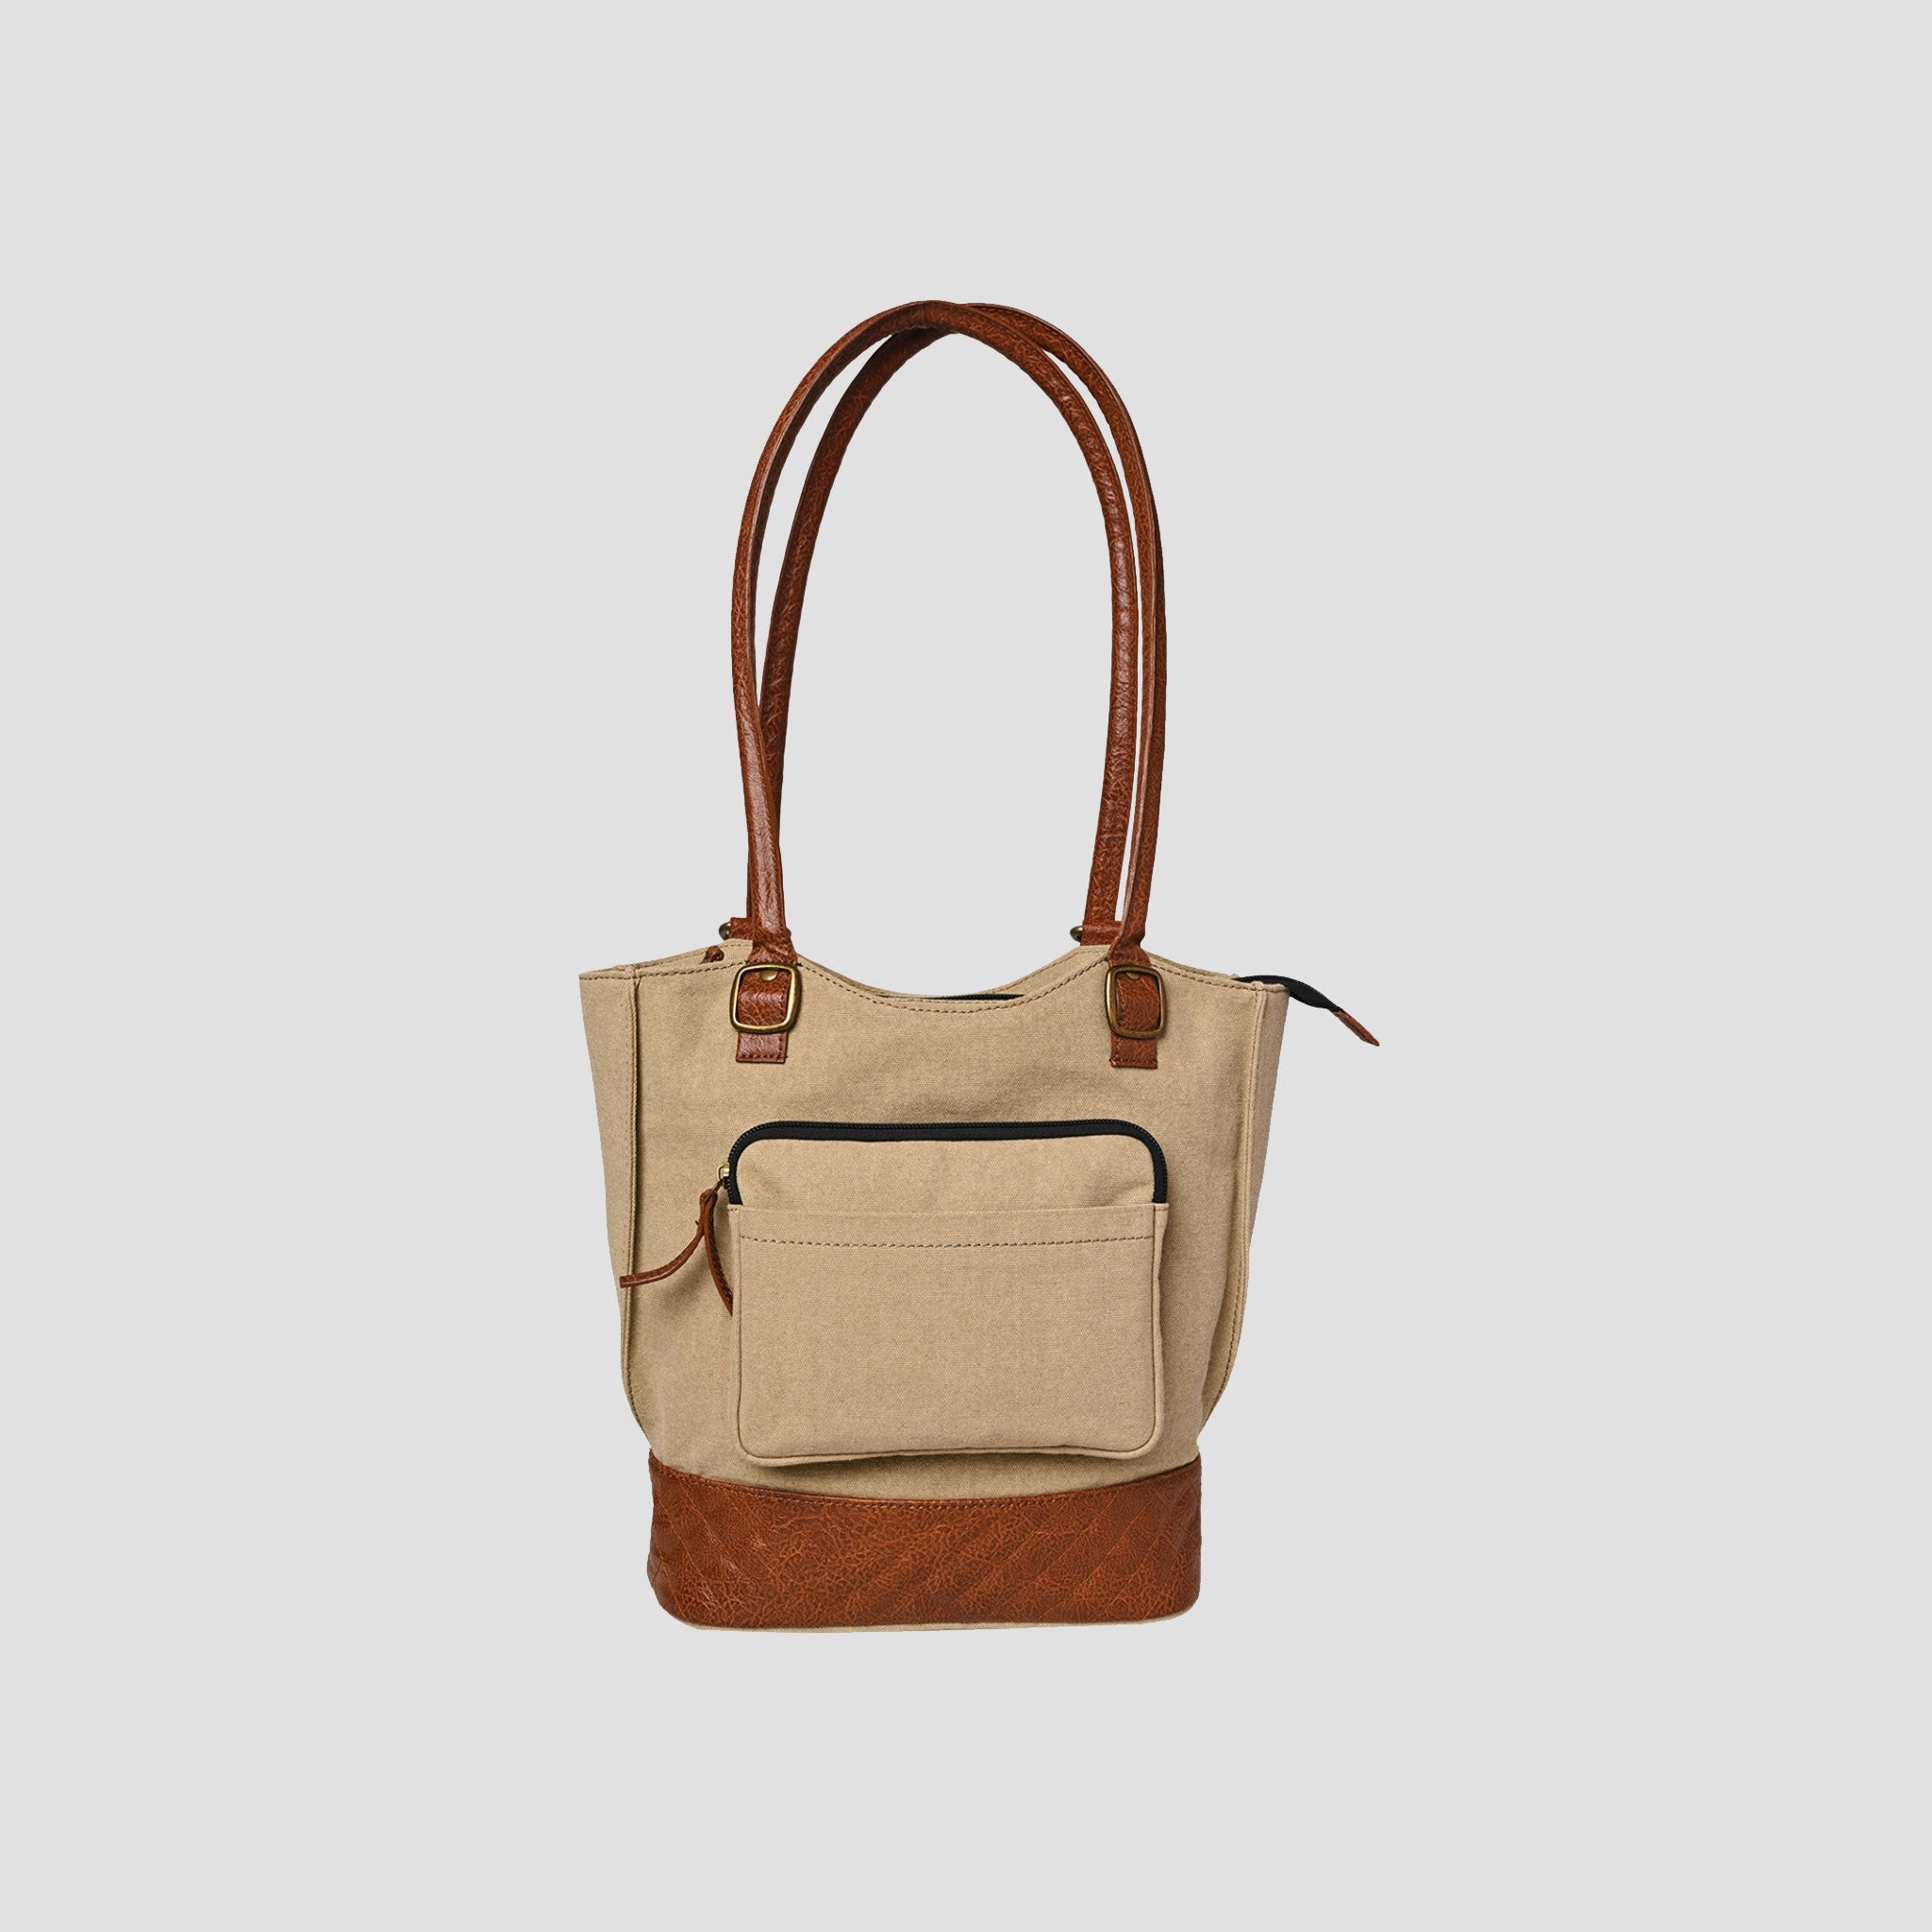 Mona B Two in One Convertible Tote: Beige - (M-2507)